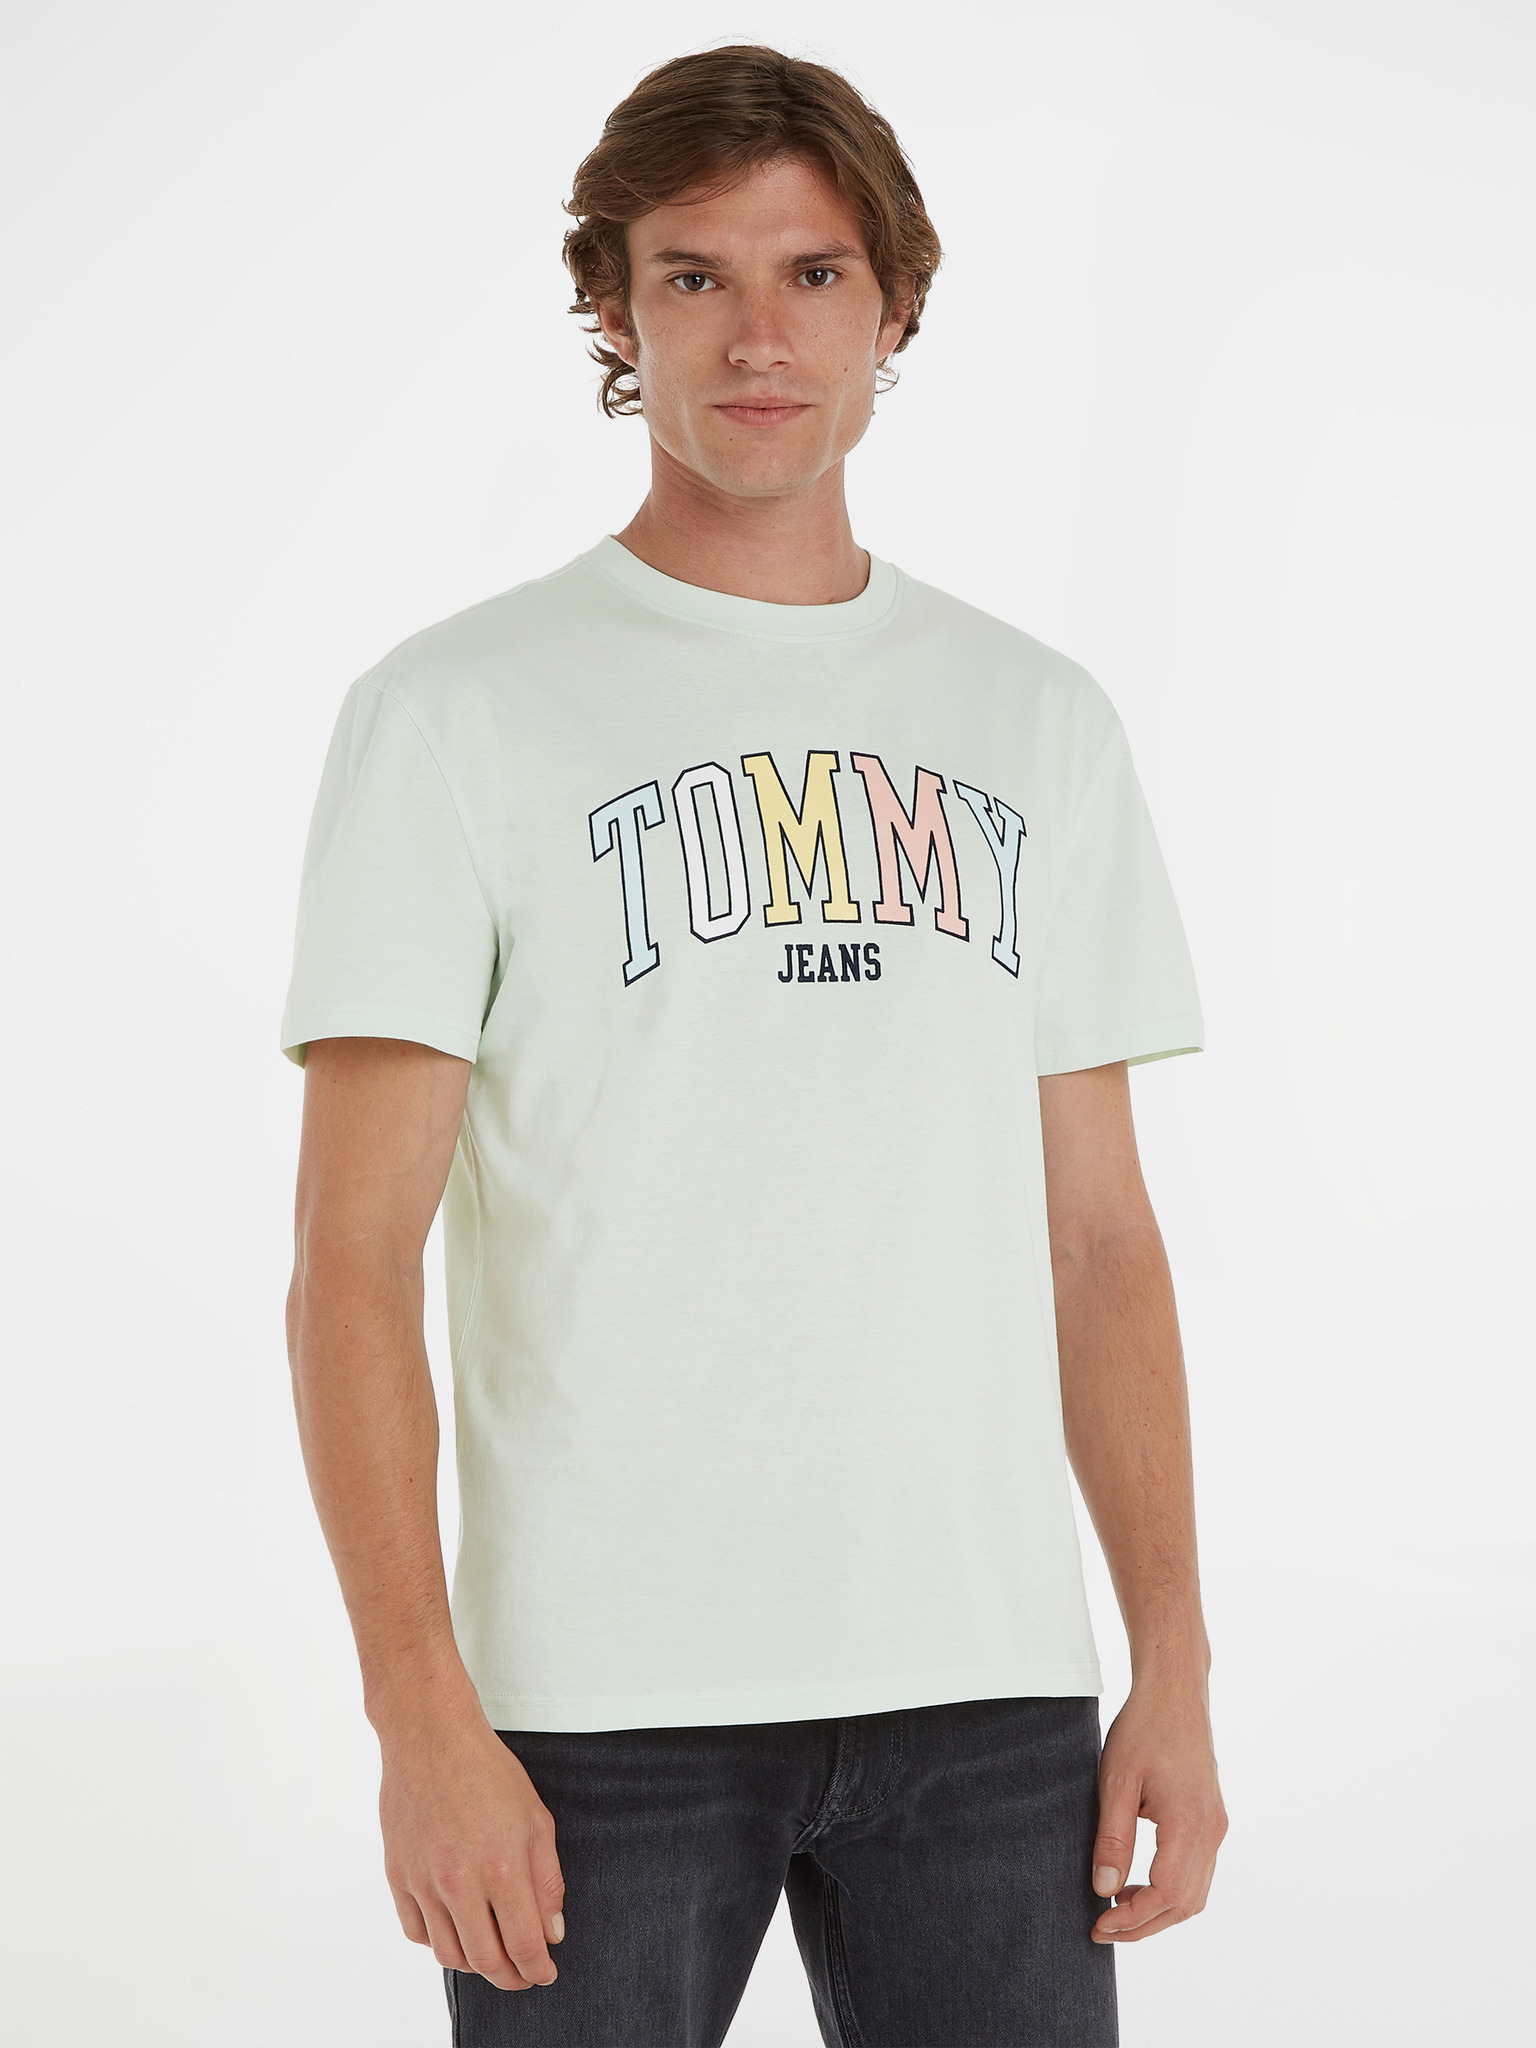 College Jeans Tommy T-shirt - Pop